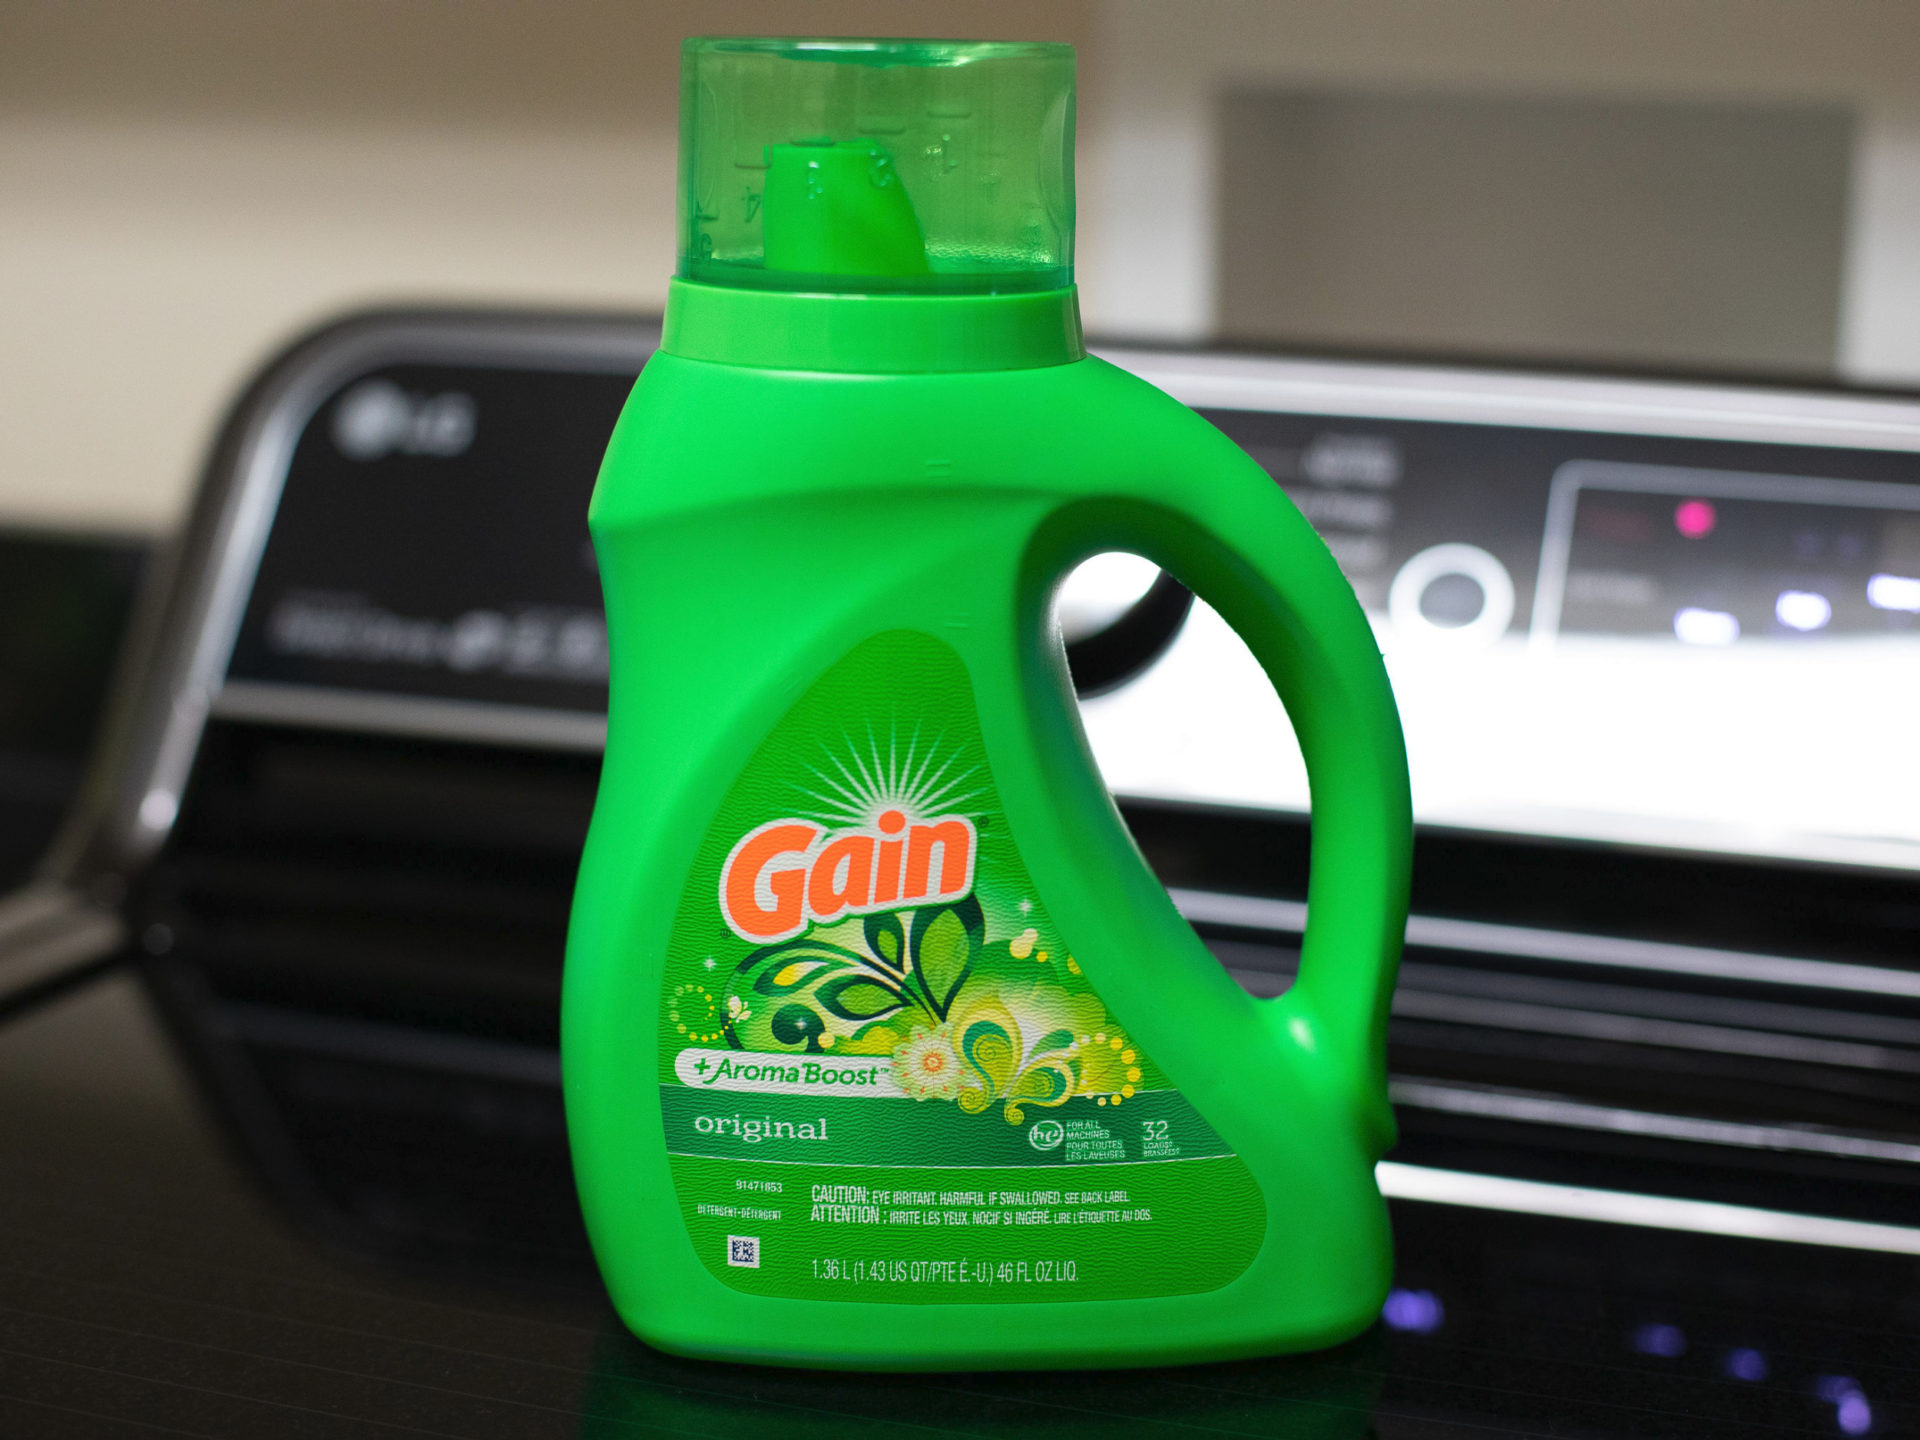 Get Gain Laundry Detergent Or Dryer Sheets As Low As $3.99 At Kroger